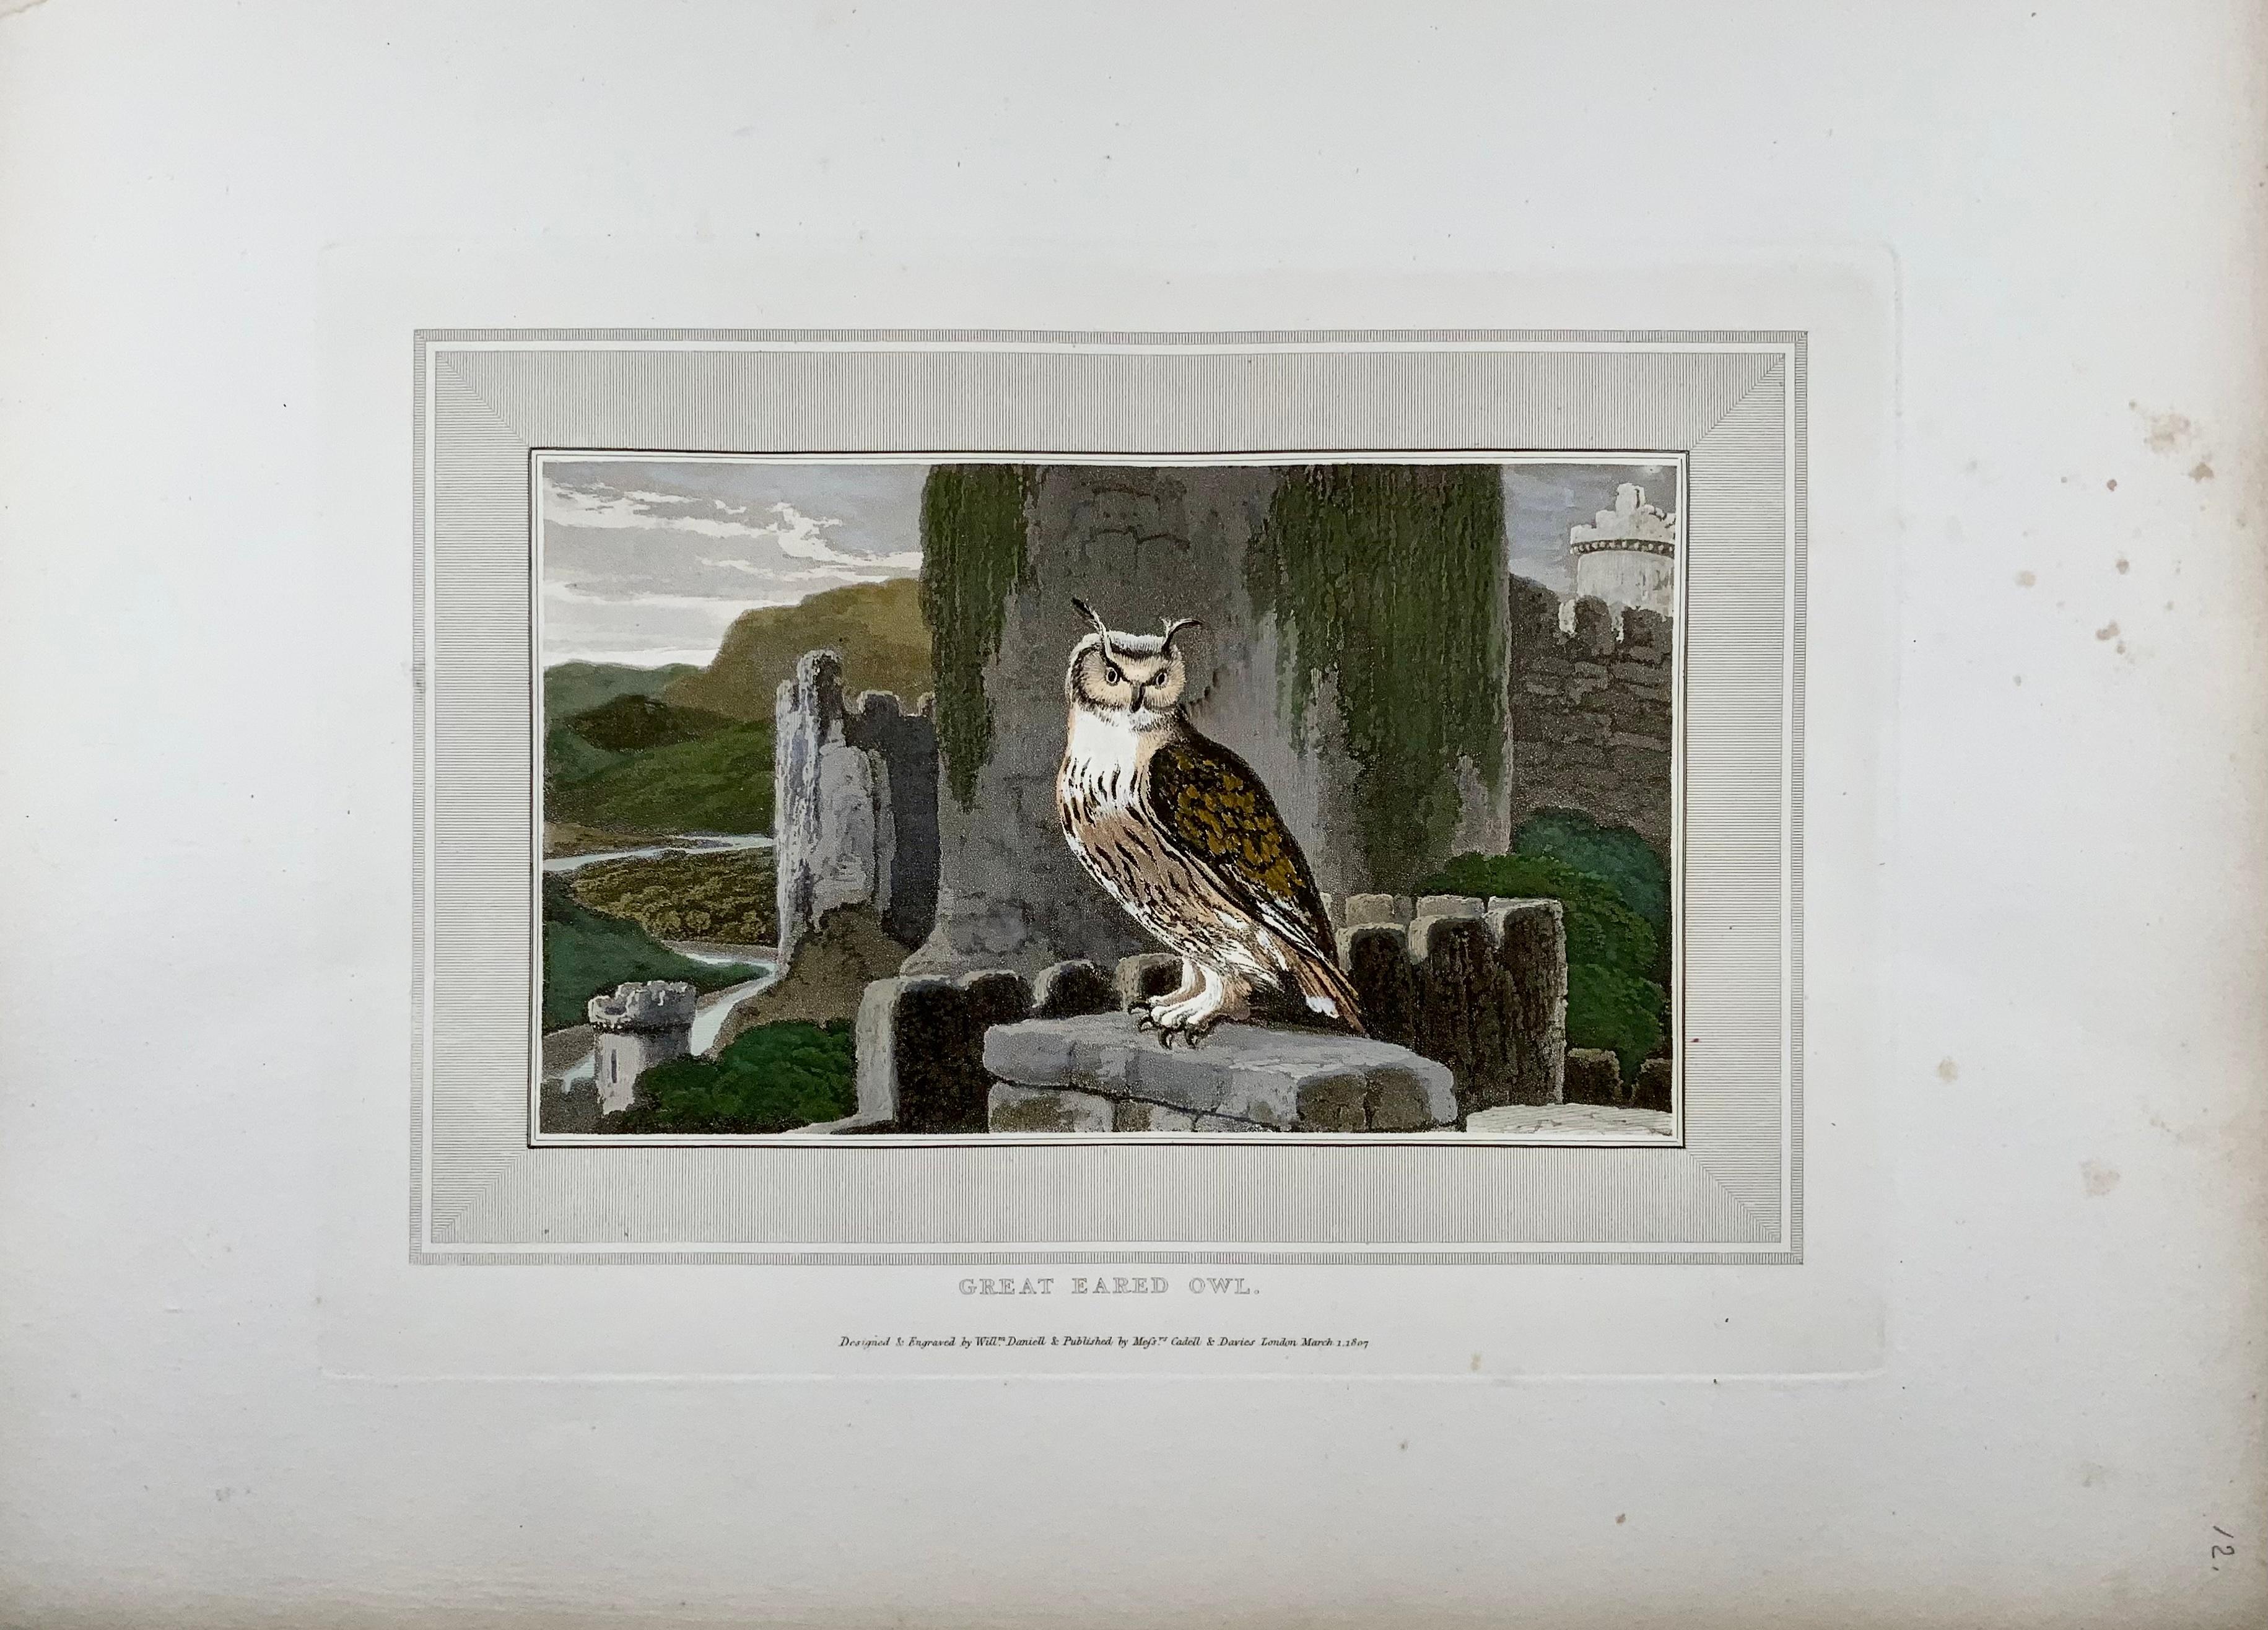 Designed and engraved by William Daniell for his work “Interesting Selections from Animated Nature.” 

Published by Cadell & Davies, London. Aquatint engraving, 1807. 

From the deluxe edition on large paper with the engravings executed on chine